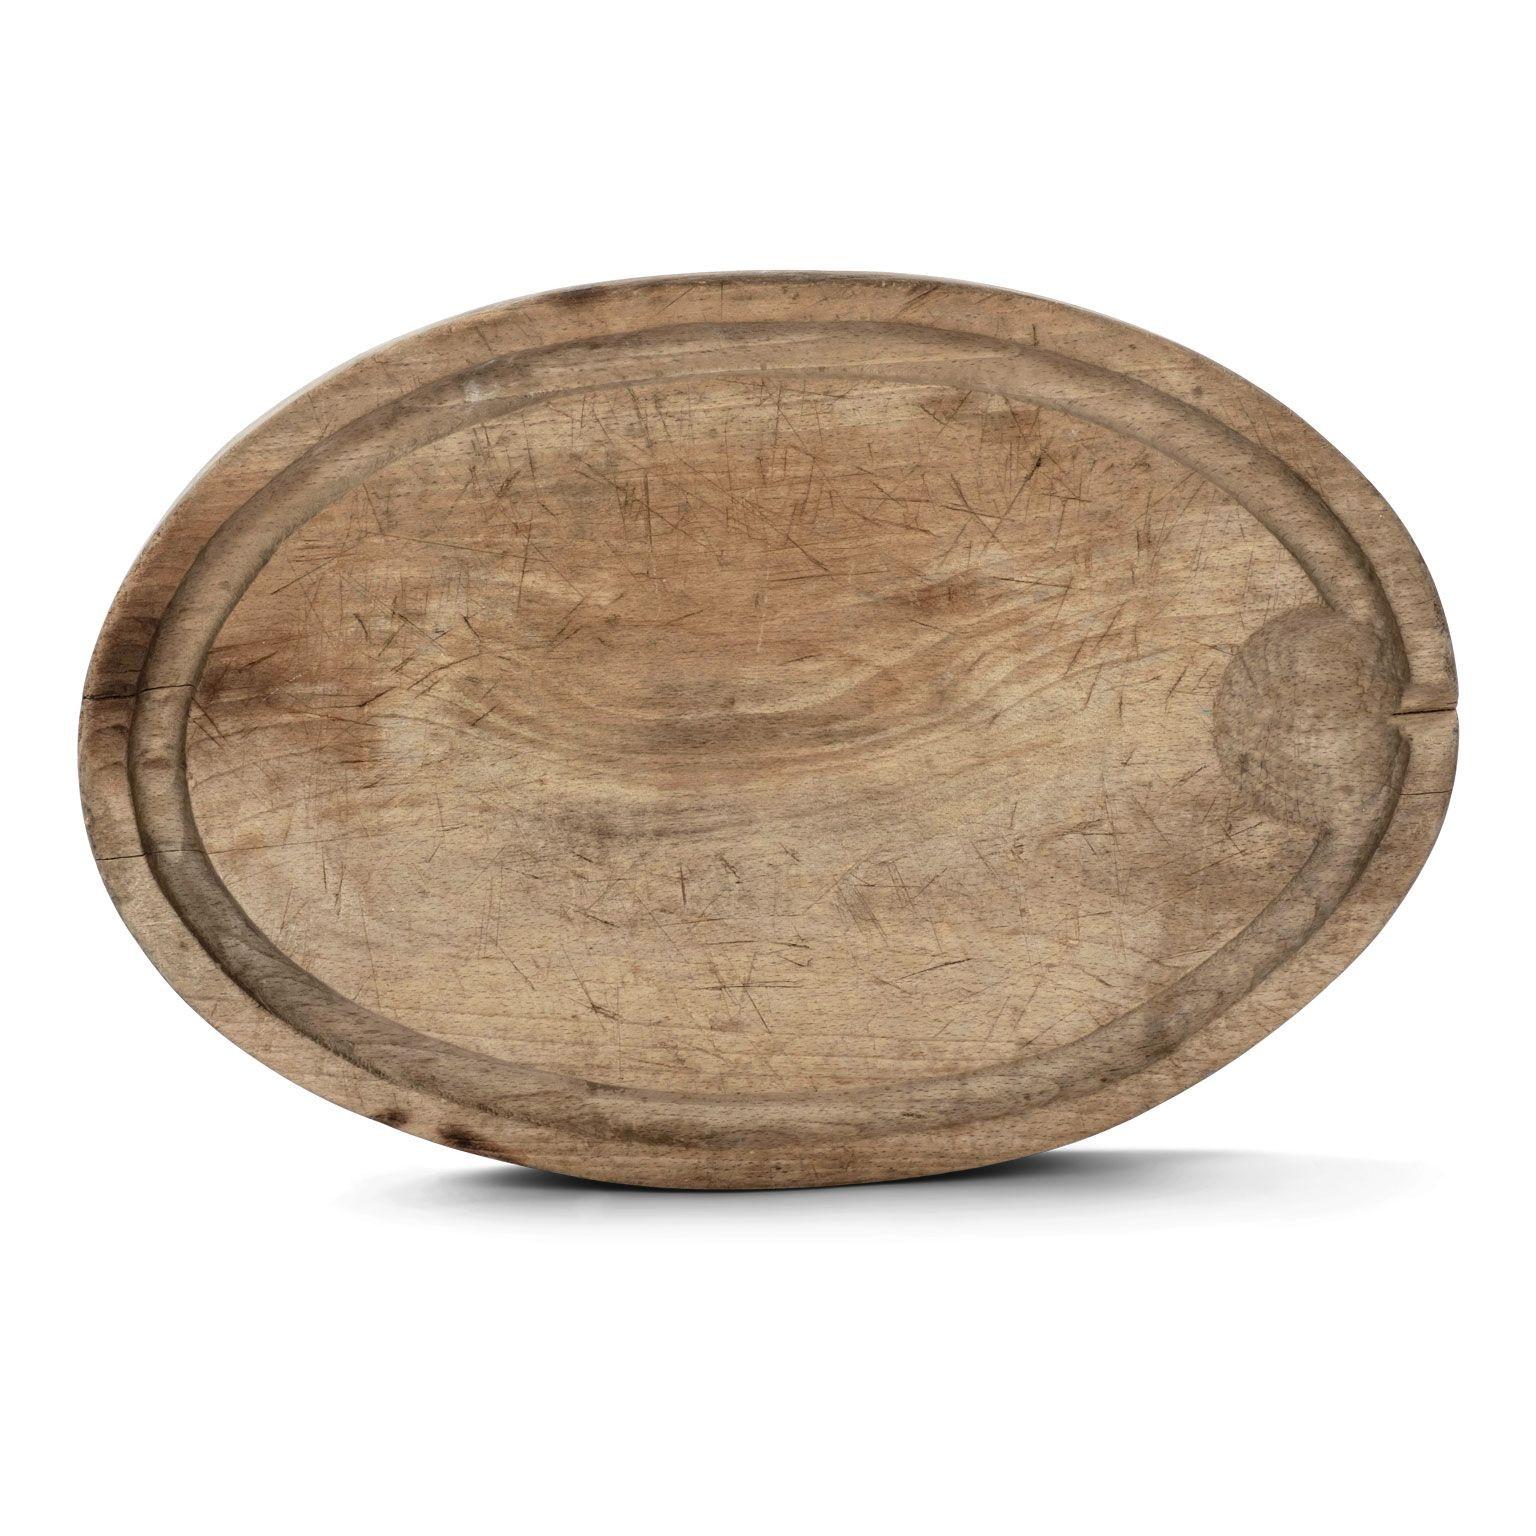 Thick oval-shaped cutting board, hand-carved in French oak. Extremely decorative and features a channeled groove designed to catch juices and drippings when cutting meats.

Note: Regional differences in humidity and climate during shipping may cause